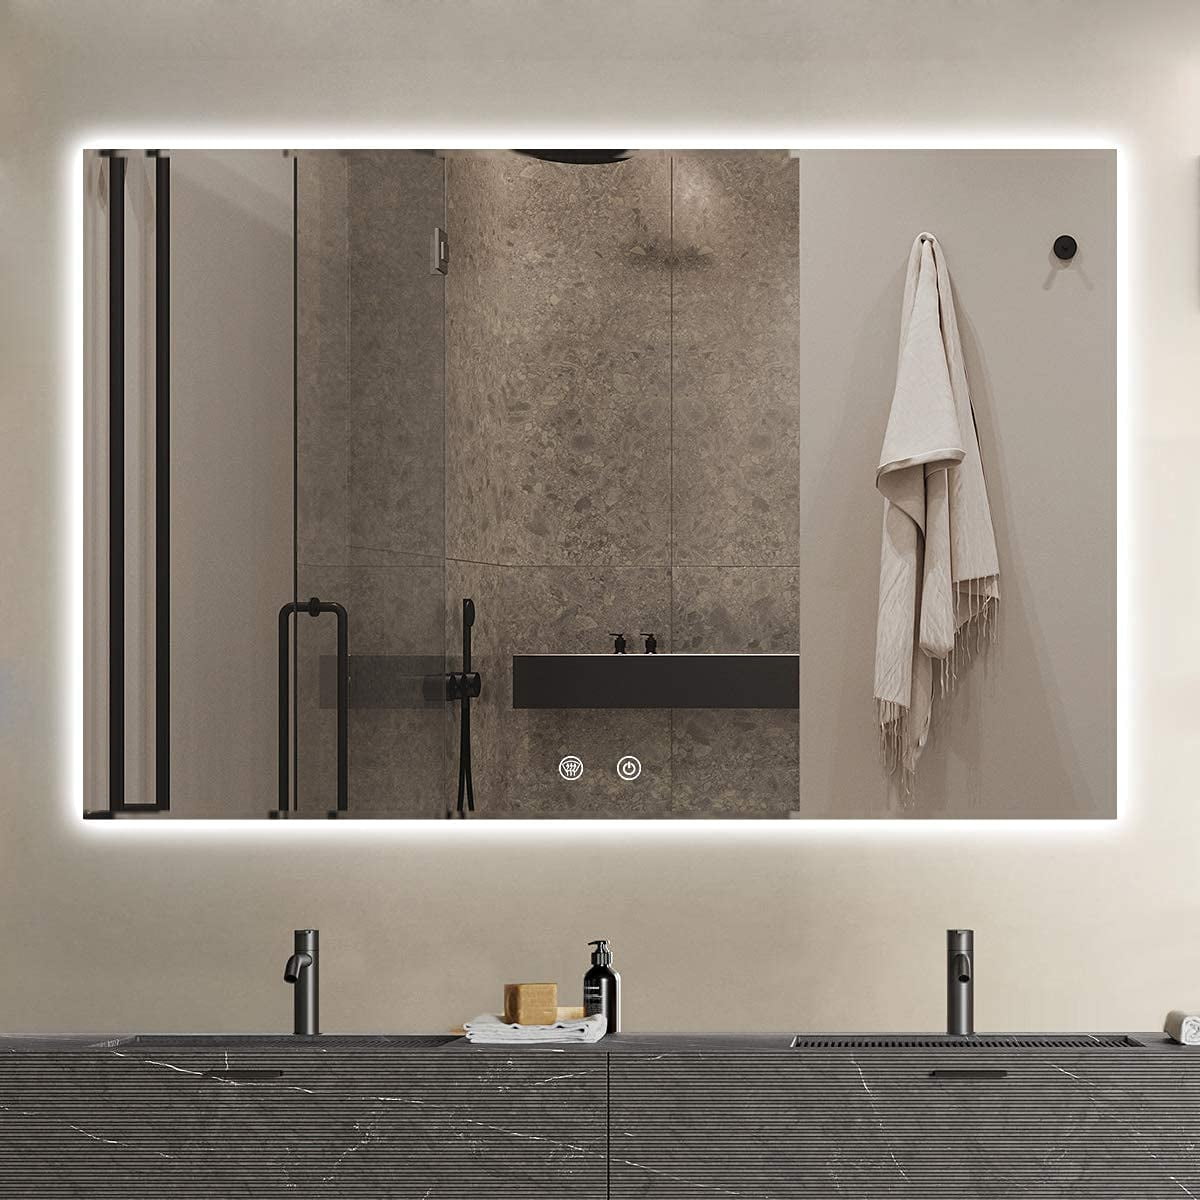 Vertical & Horizontal with Touch Switch Adjustable Brightness IOWVOE 40 x 24 Inch LED Backlit Bathroom Mirror Anti-Fog Dimmable Vanity Wall Mounted Makeup Memory Mirror with Light